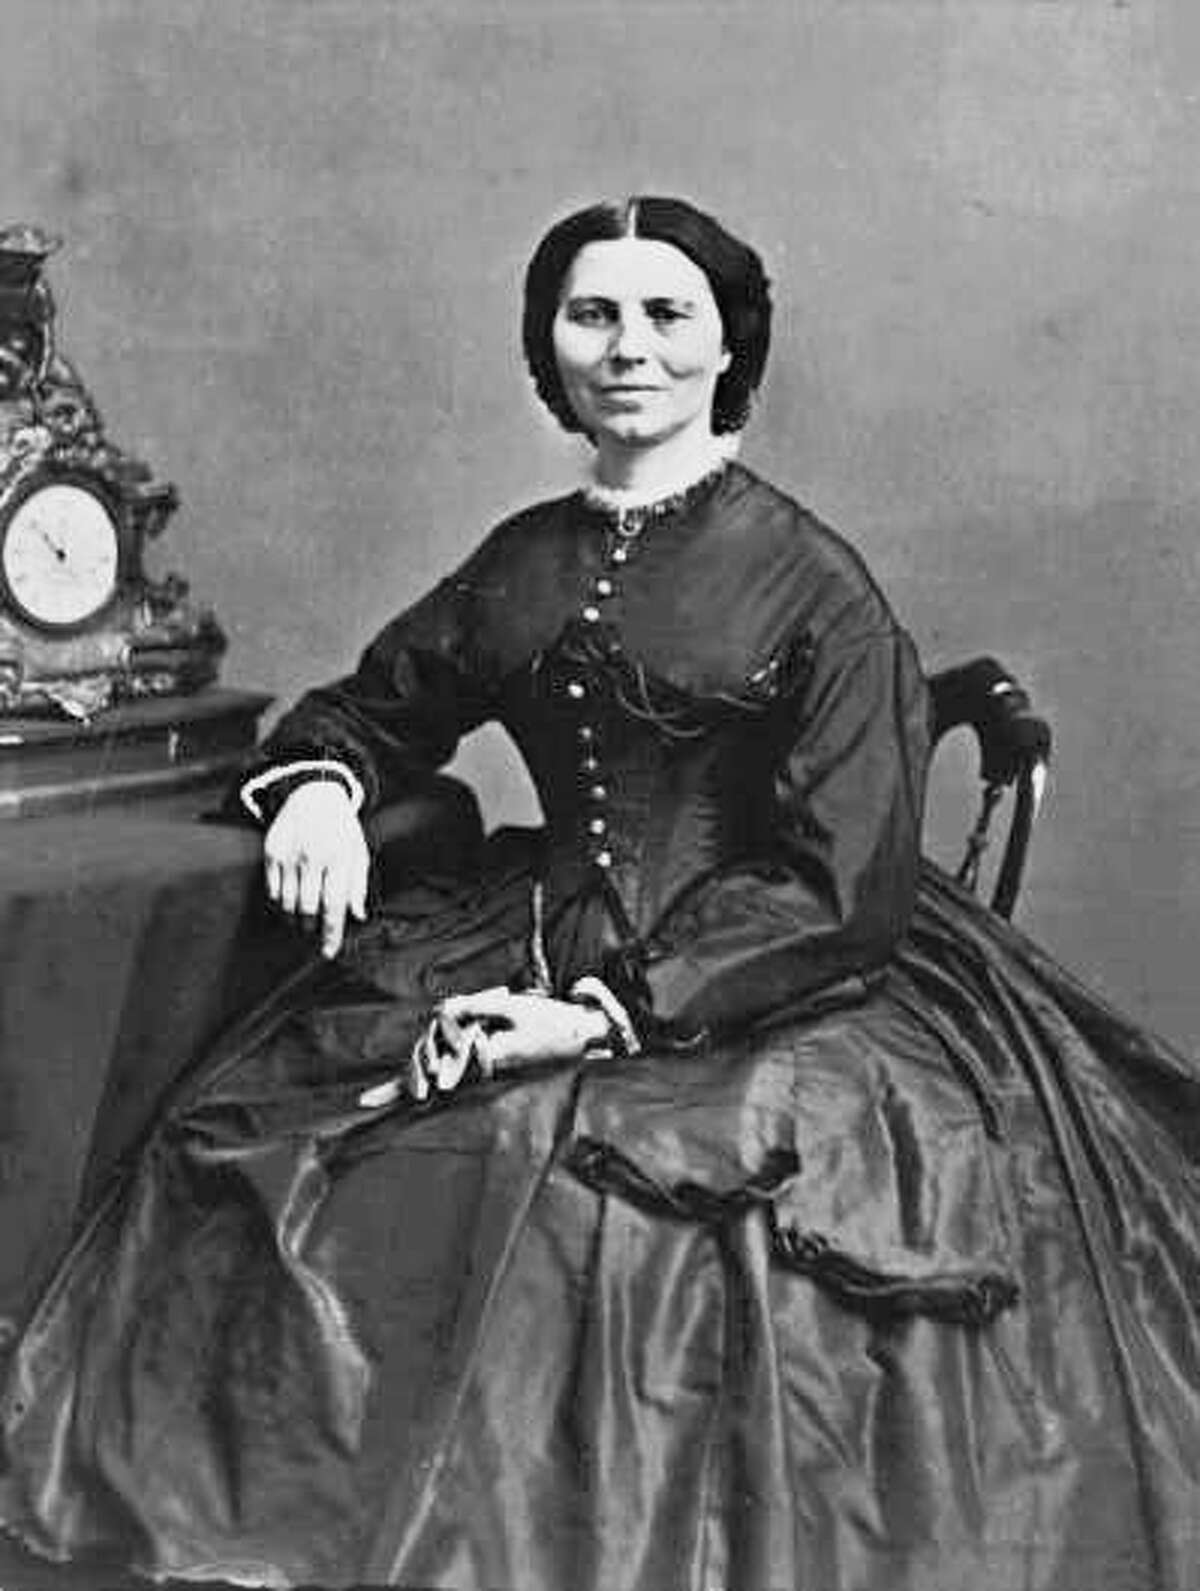 Clara Barton. HOUCHRON CAPTION (09/03/2000): Barton HOUSTON CHRONICLE SPECIAL SECTION: ECHOES OF THE STORM. HOUCHRON CAPTION (09/05/2000): Clara Barton, known for her work as a nurse during the Civil War, helped farmers after the 1900 storm. HOUSTON CHRONICLE SERIES: ECHOES OF THE STORM.